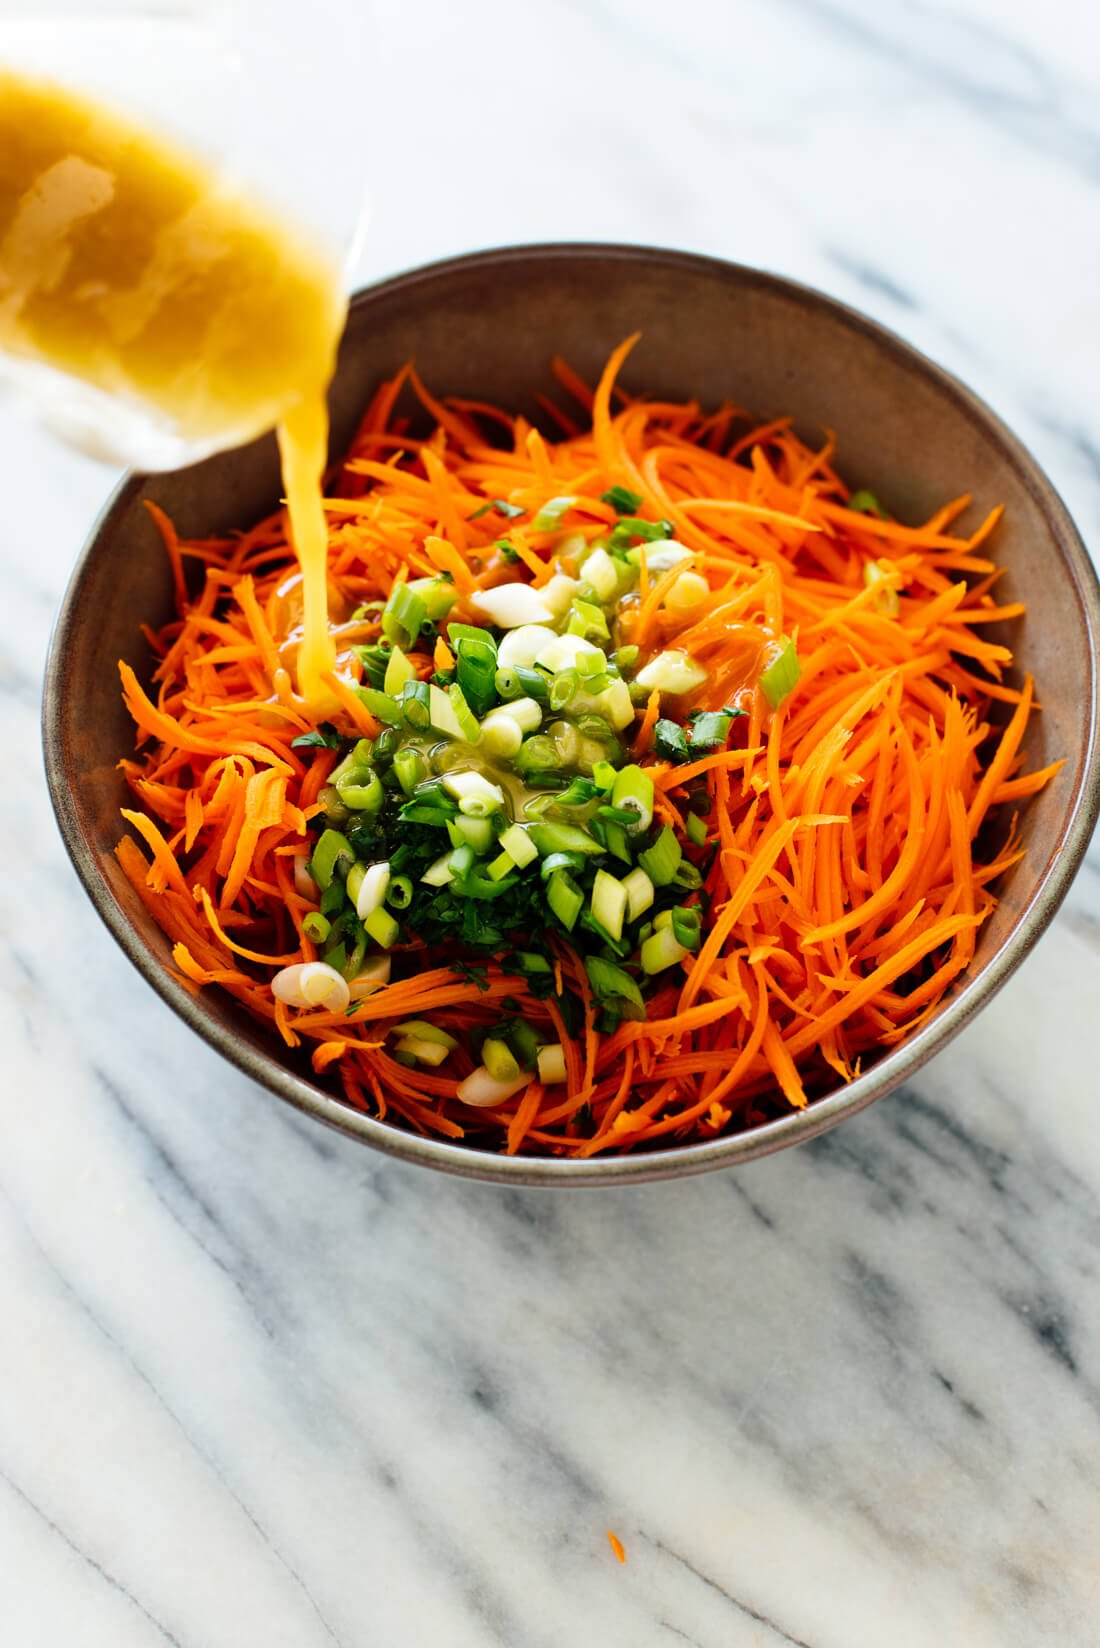 French Carrot Salad Recipe - Cookie and Kate